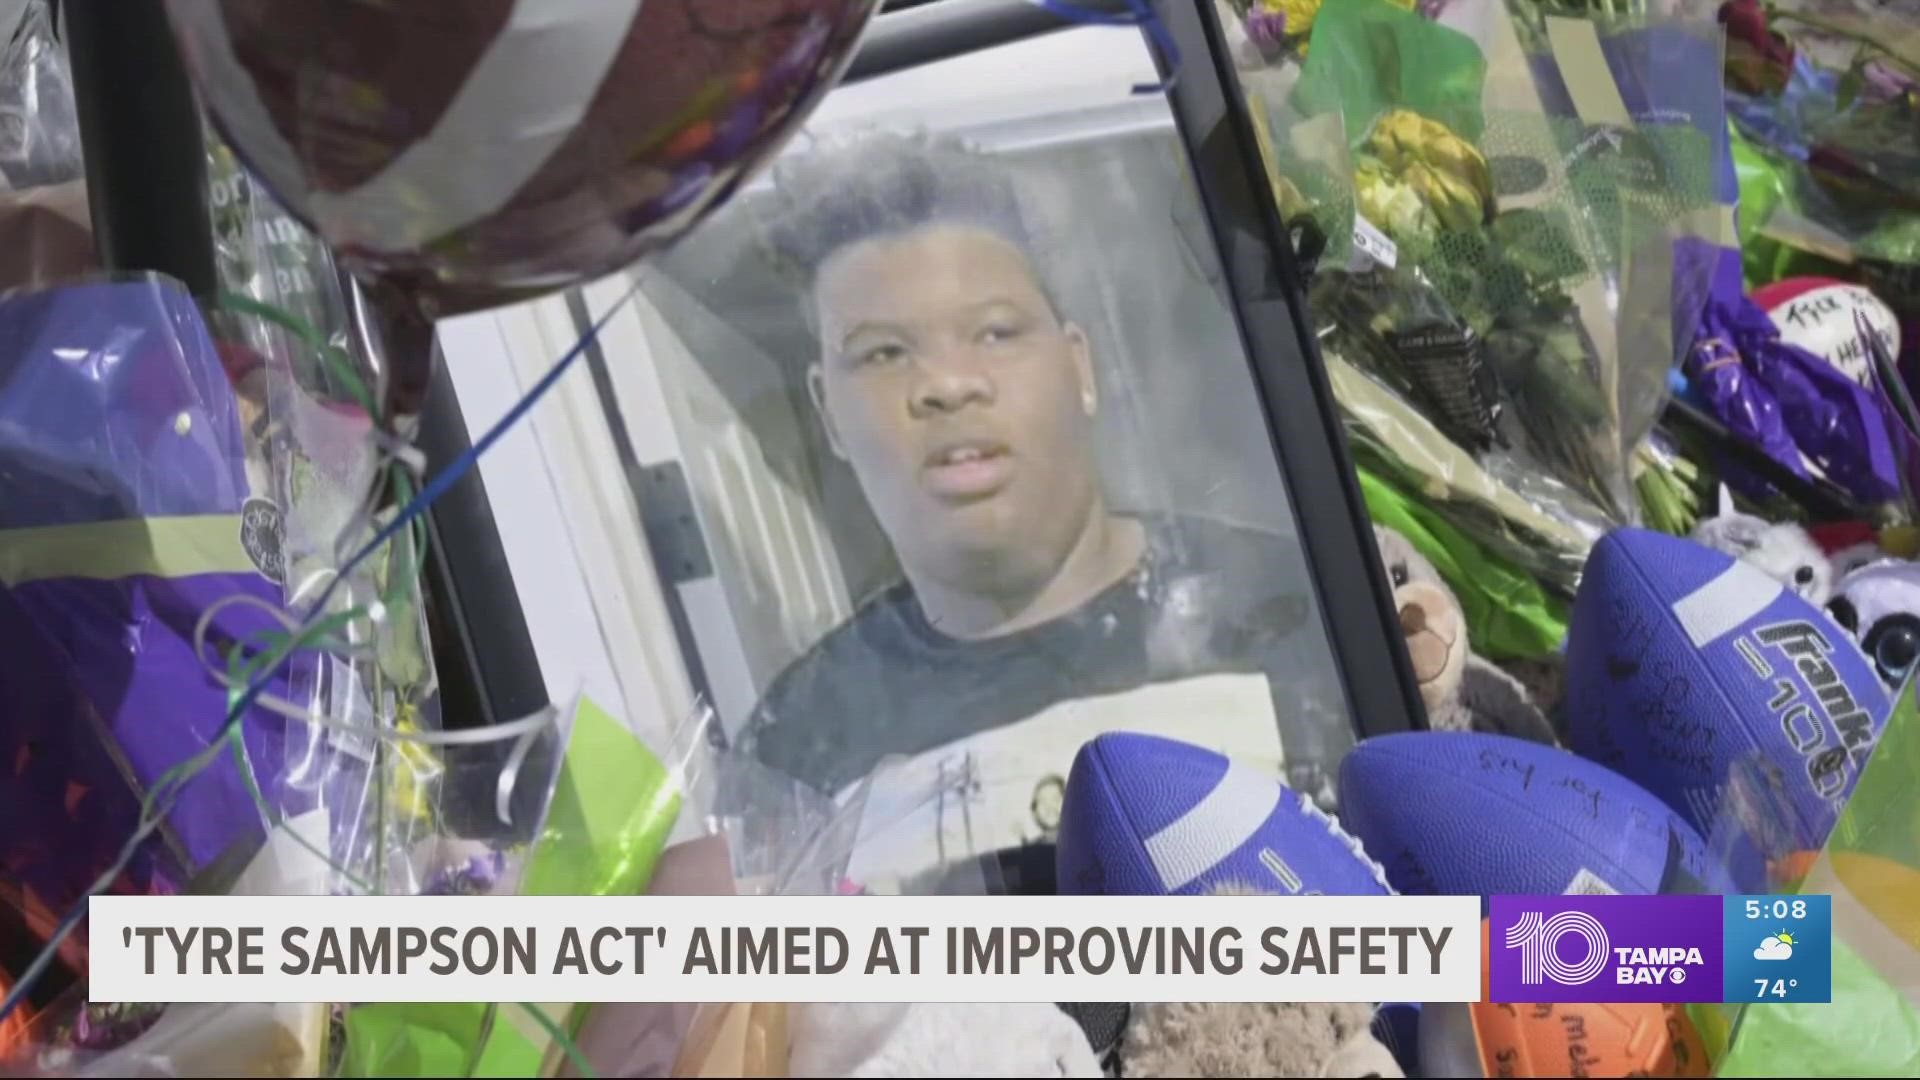 Sampson, who was visiting Florida from Missouri, fell from a FreeFall drop tower at ICON Park – which sparked an investigation into the faults of the ride.